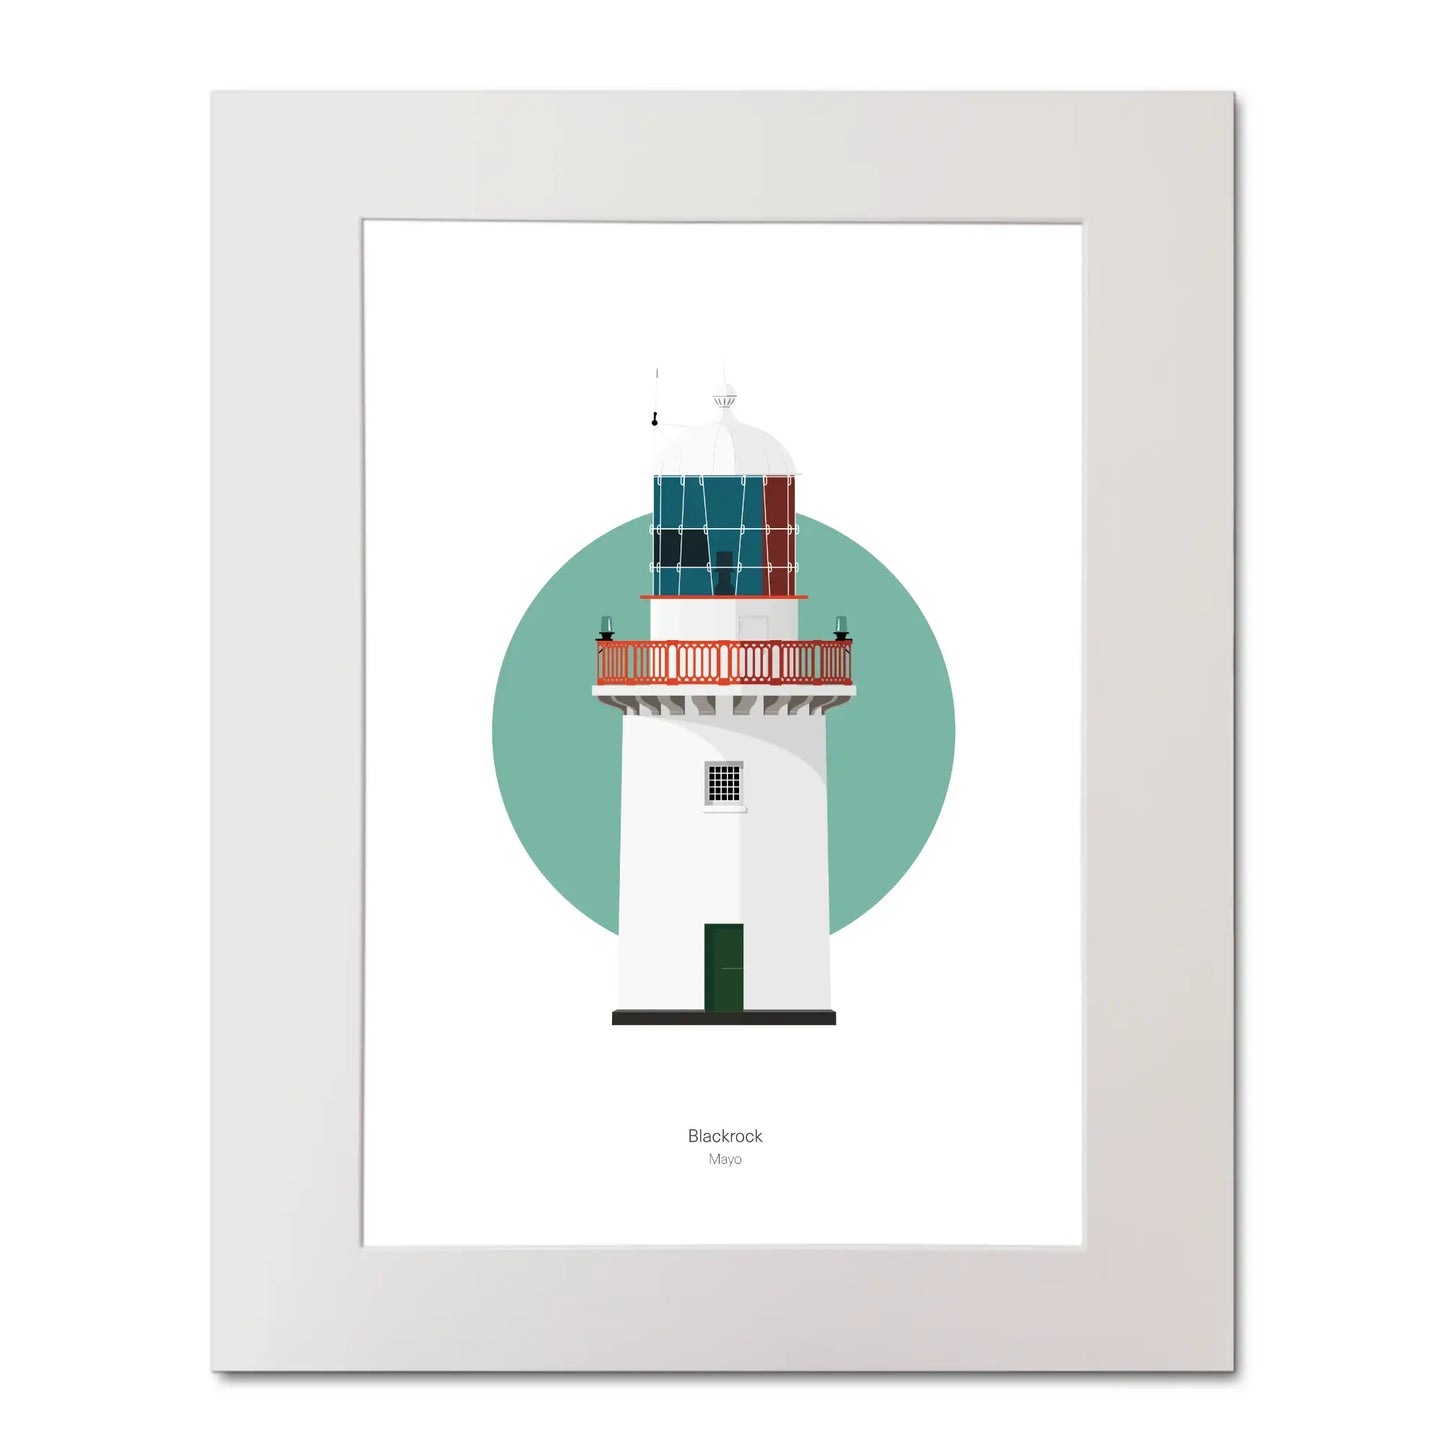 Illustration of Black Rock lighthouse on a white background inside light blue square, mounted and measuring 40x50cm.